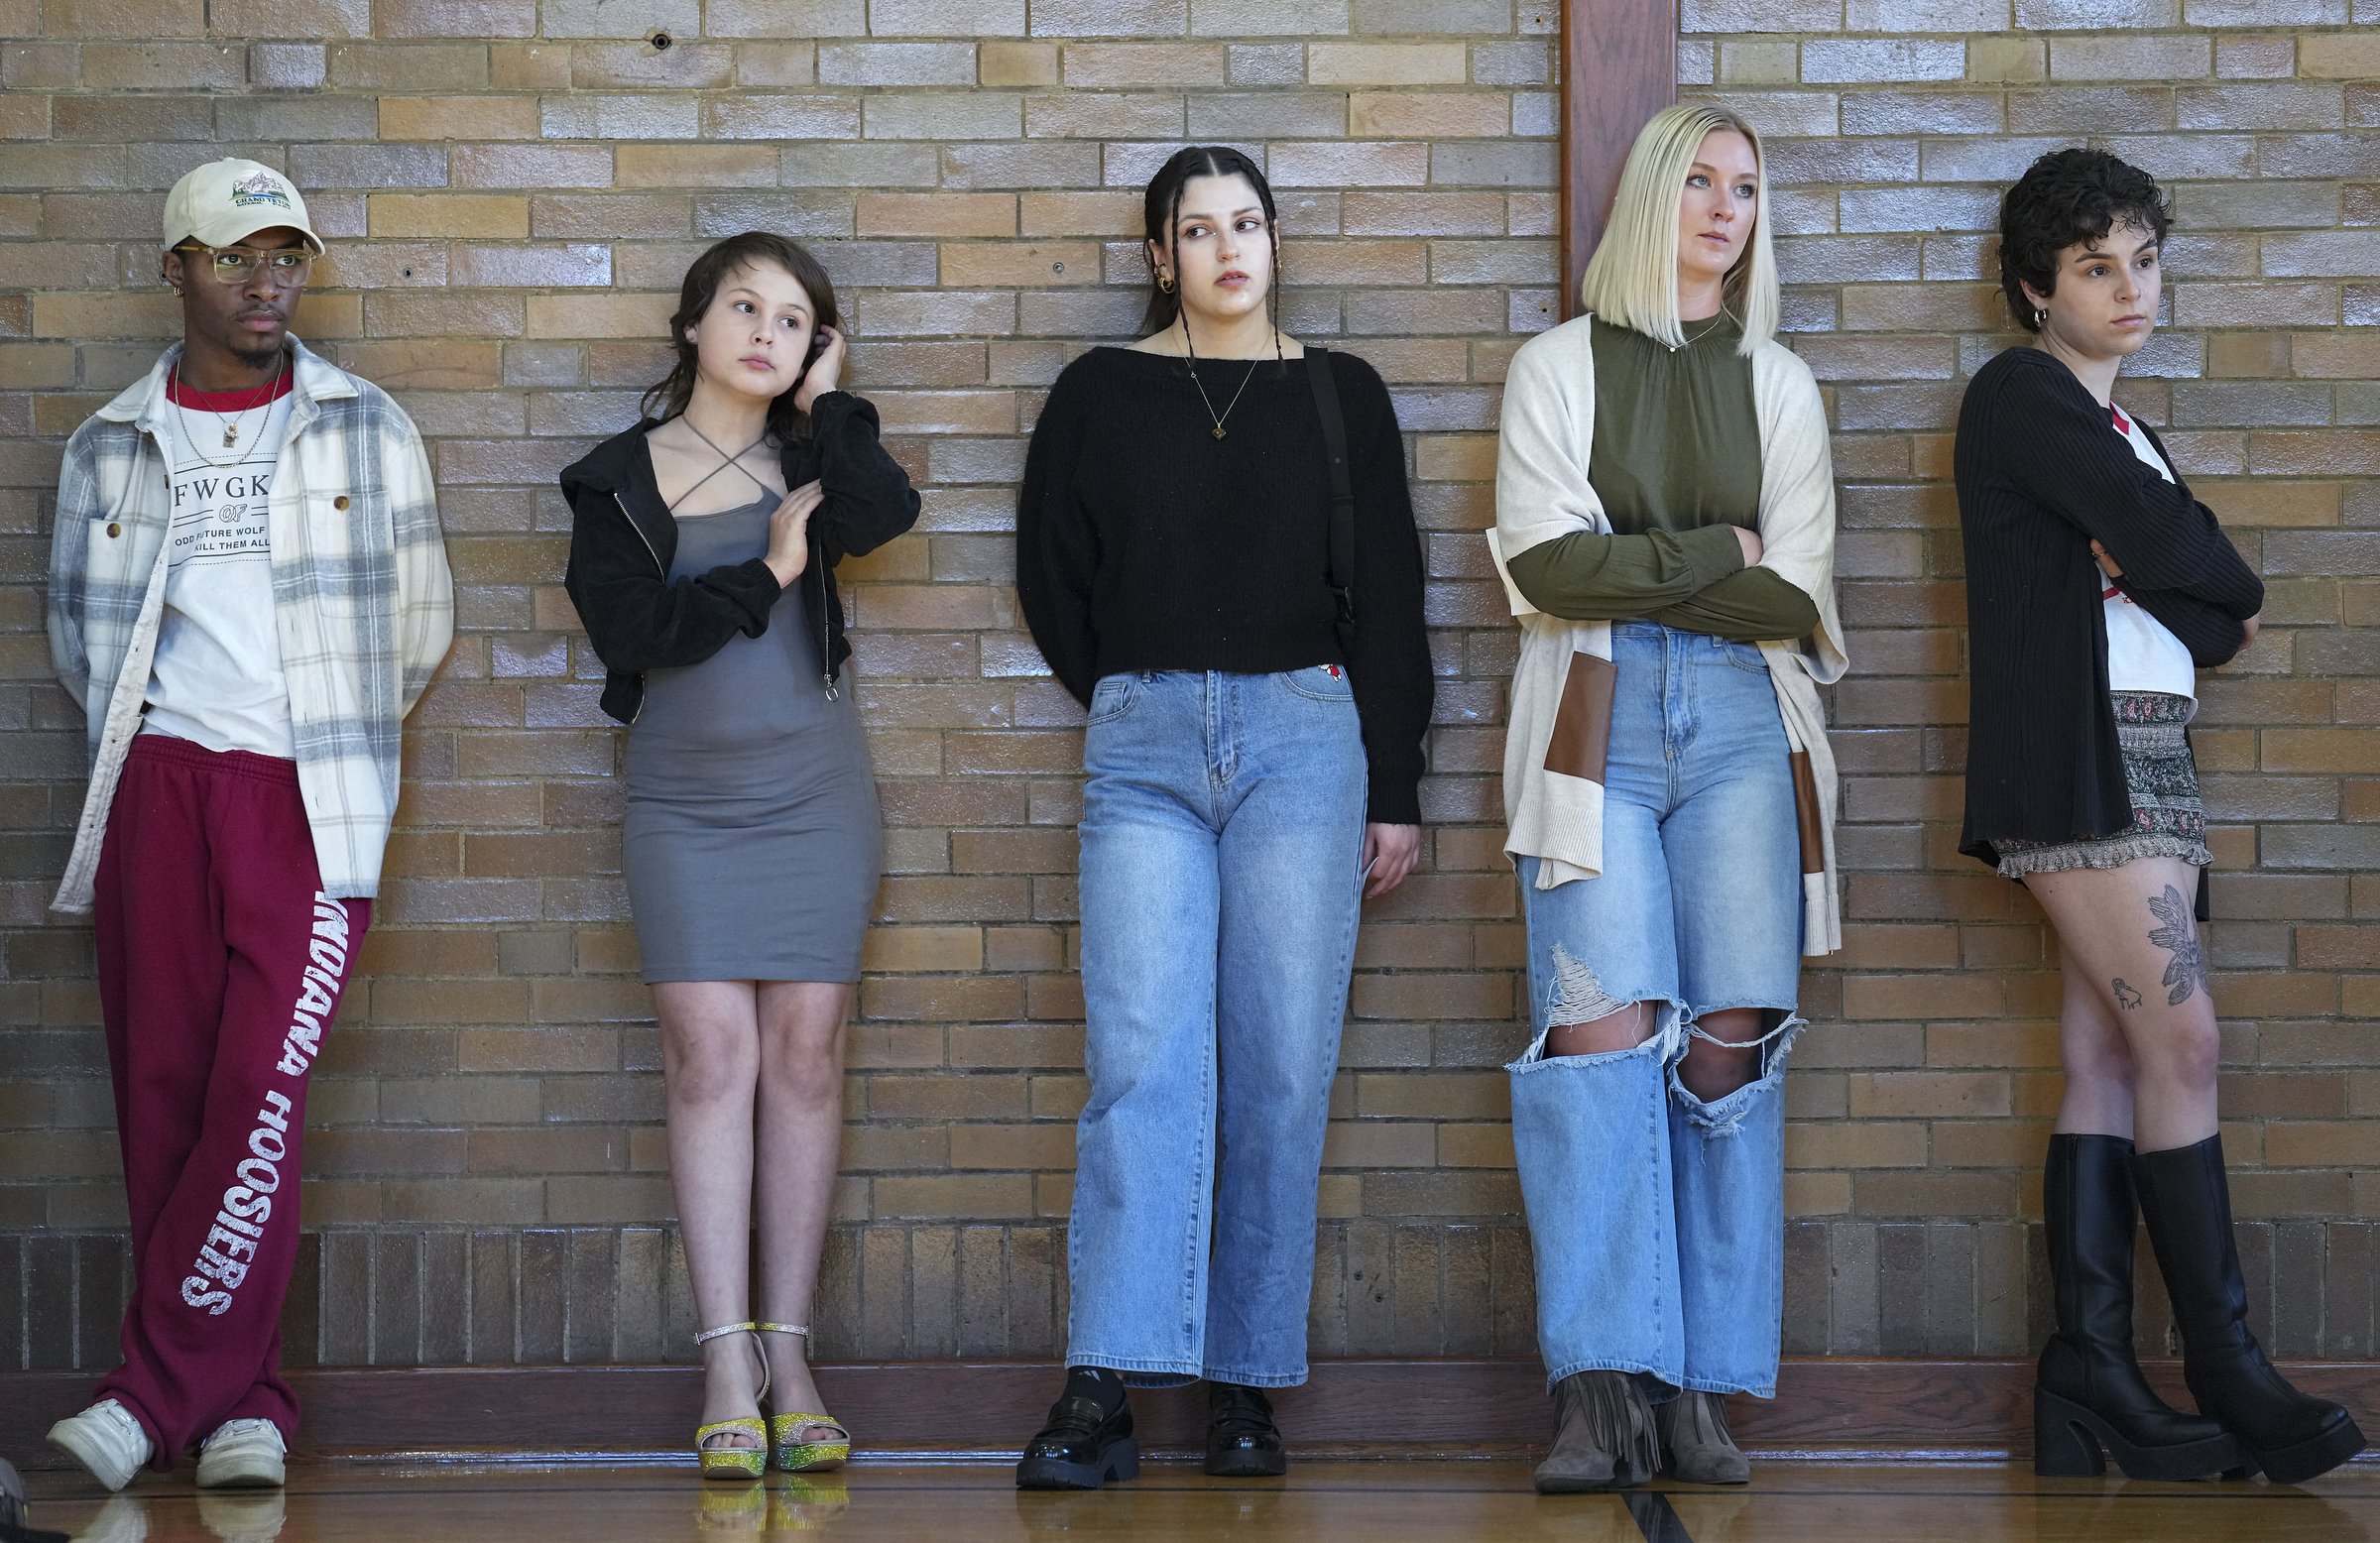  Kirin Clawson, second from left, waits in line to practice her runway walk Sunday, April 2, 2023, during rehearsal for the Trashion Refashion show in Bloomington, Ind. For the show, Clawson would model an outfit designed by Jeanne Smith. "We need tr